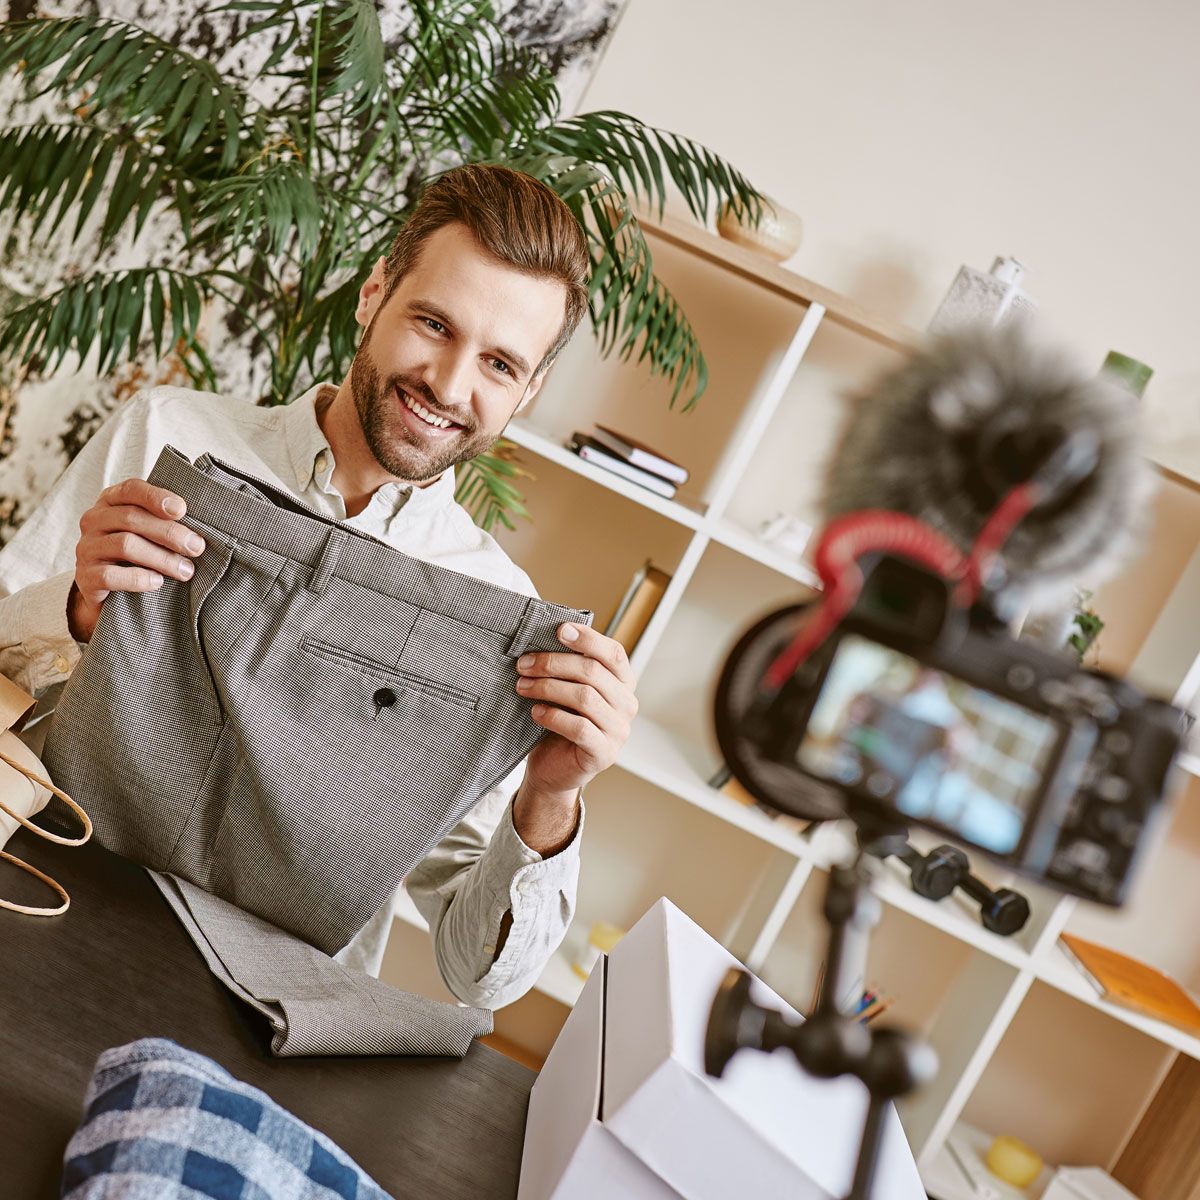 Man holding up a pair of pants in front of a camera for a photo